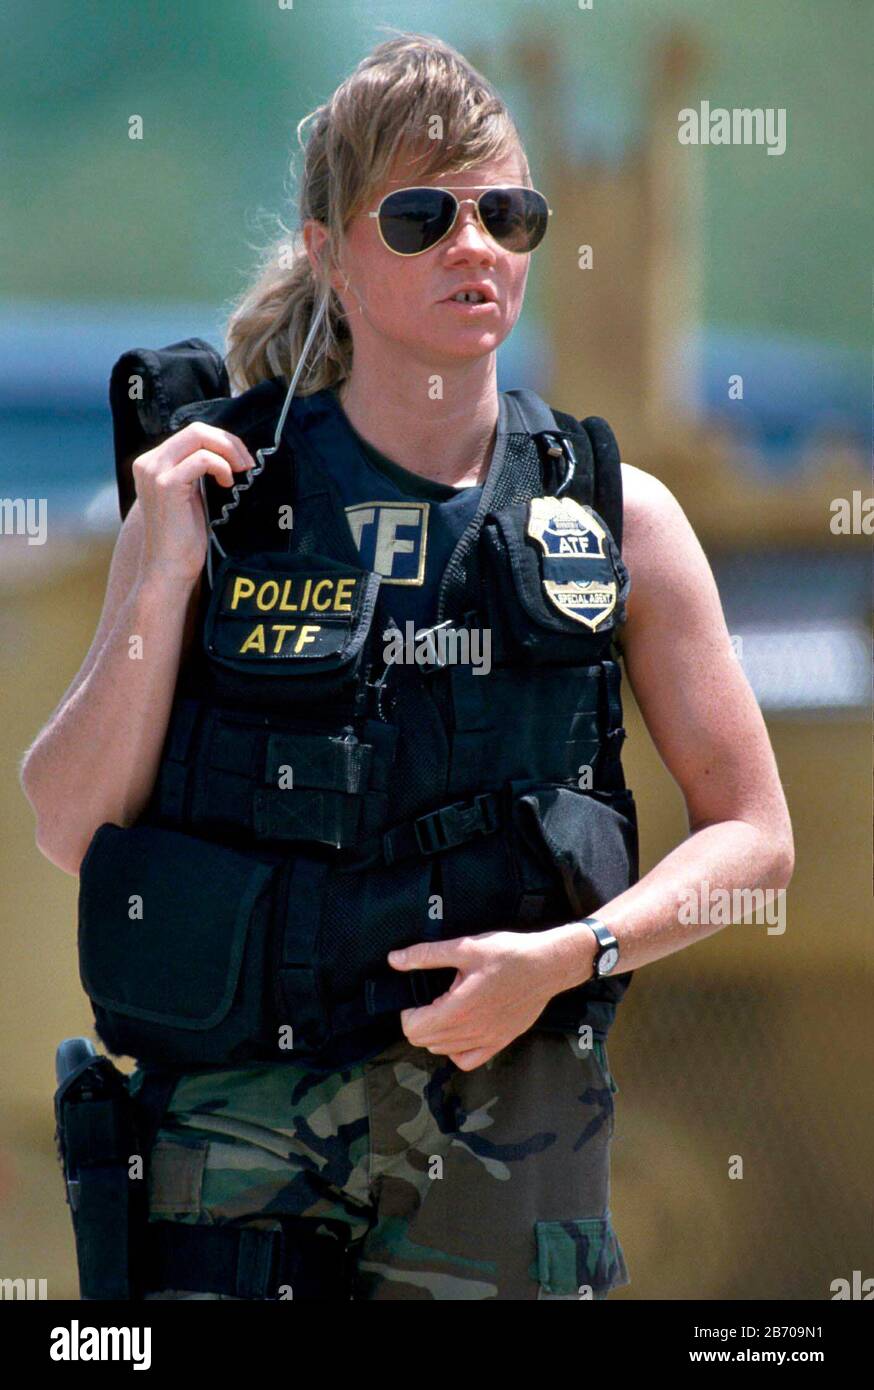 Waco, Texas USA, 1993: Female ATF officer on duty at standoff between ATF agents and the members of the Branch Davidian religious cult. ©Bob Daemmrich Stock Photo